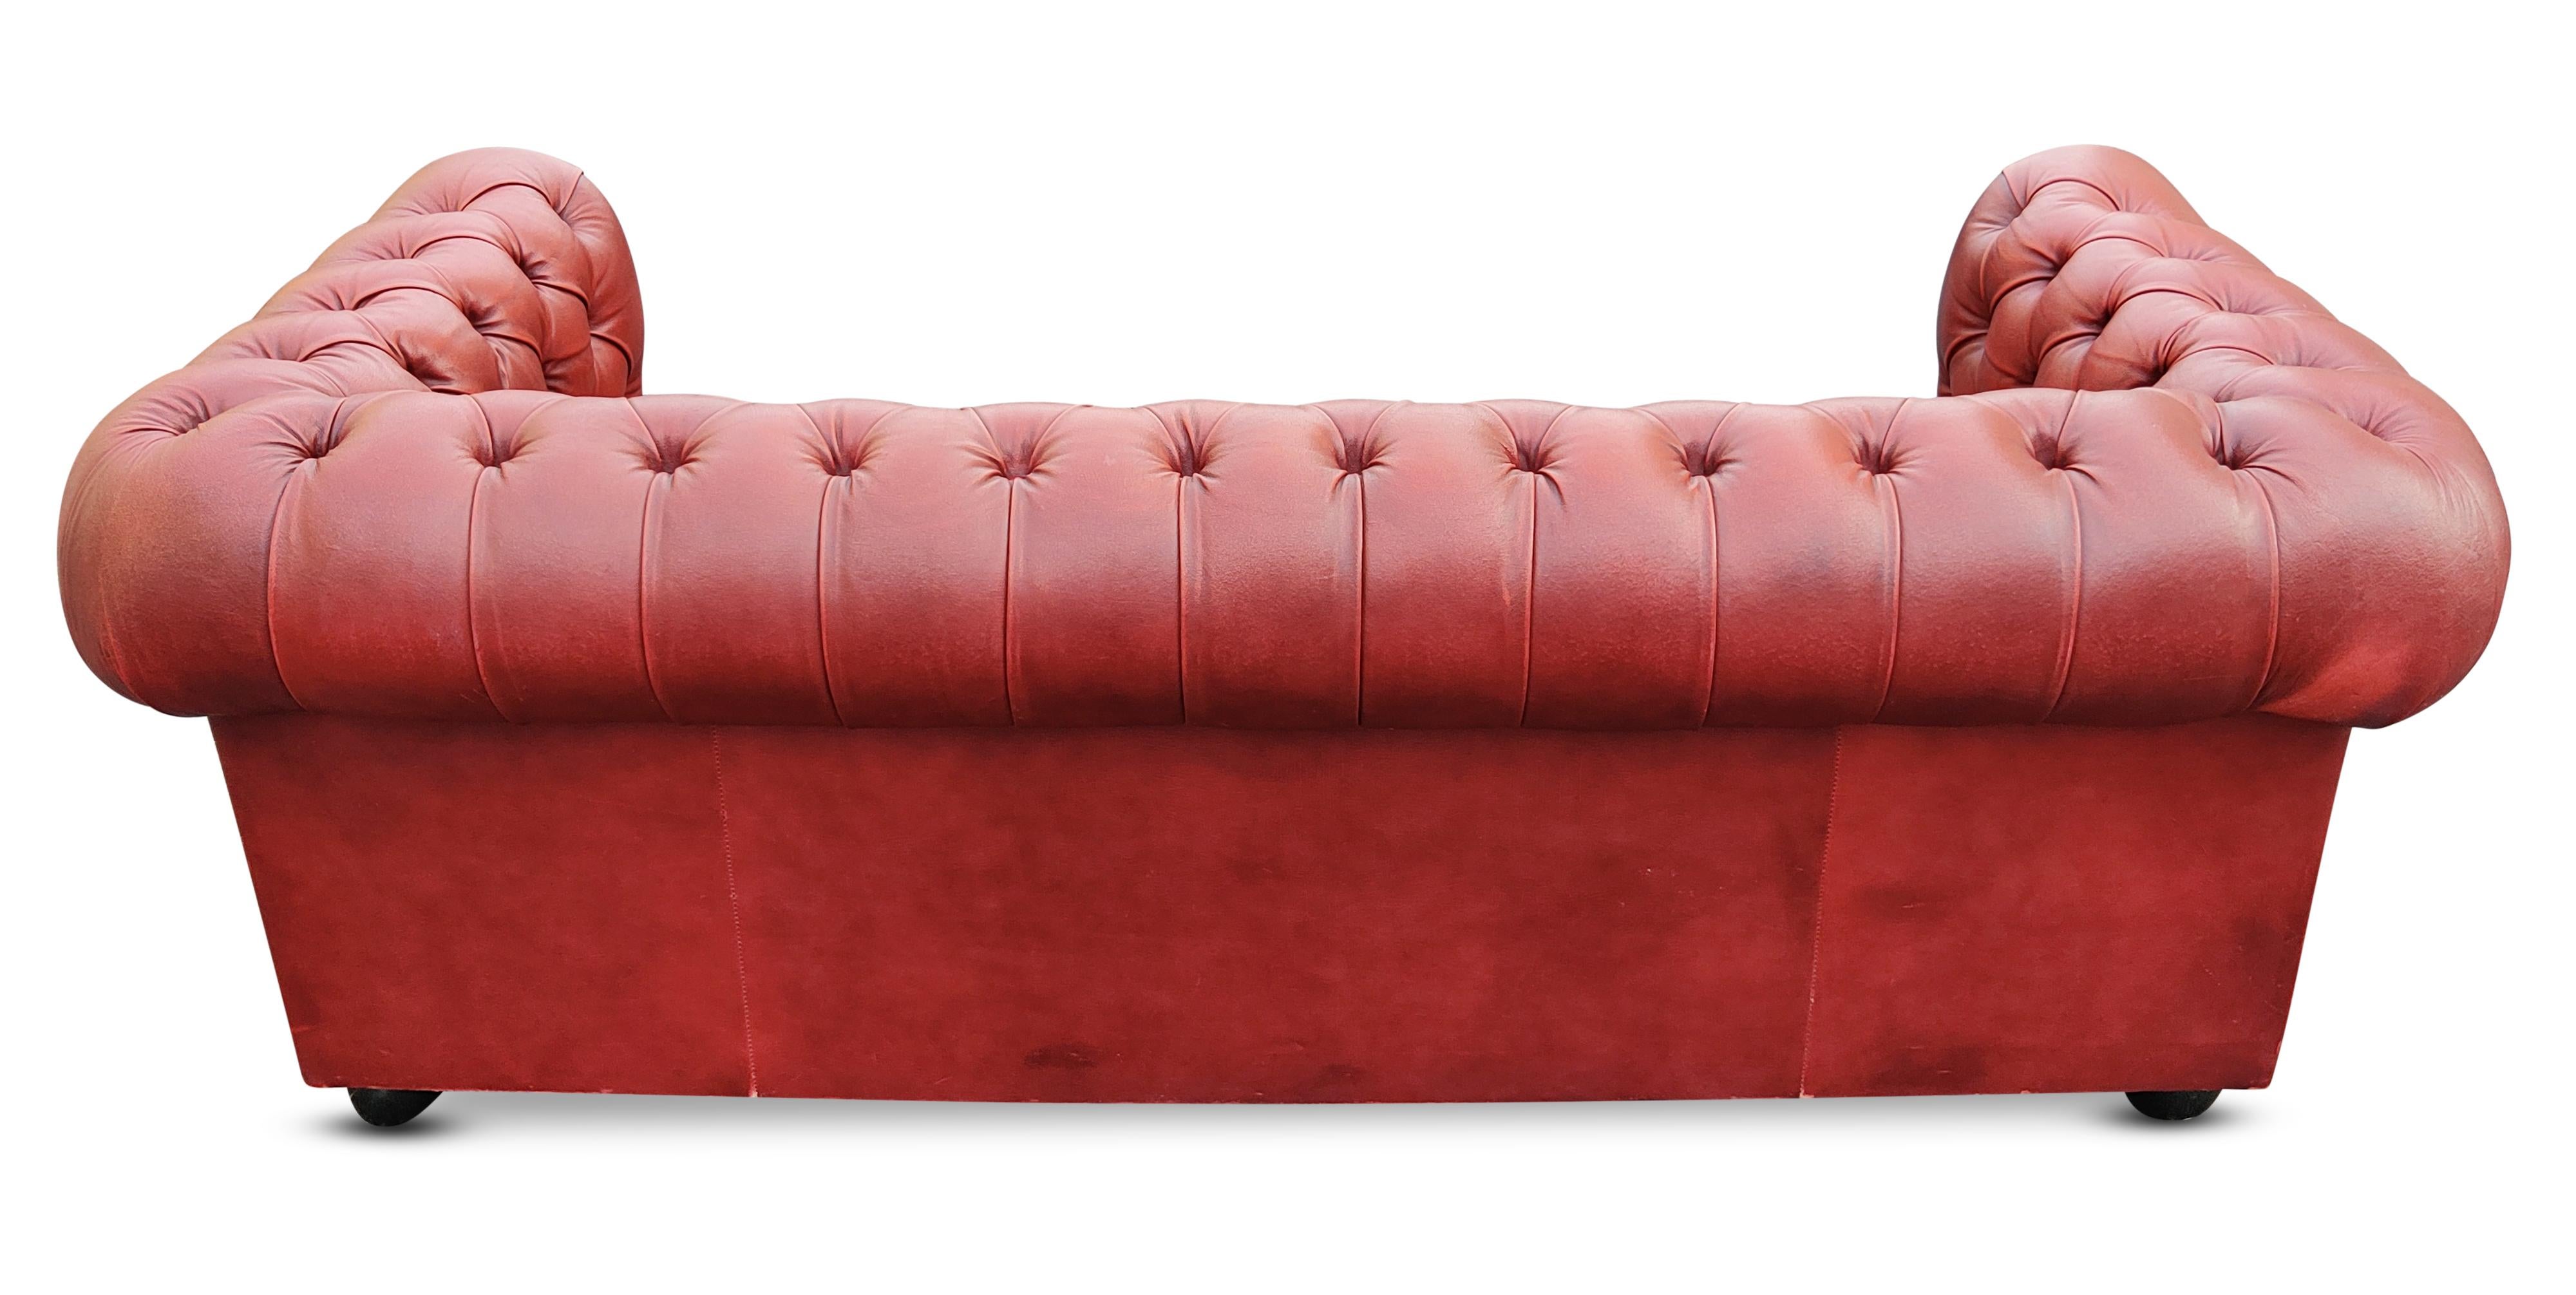 Brass English Chesterfield Cardovian Oxblood Tufted Leather Sofa